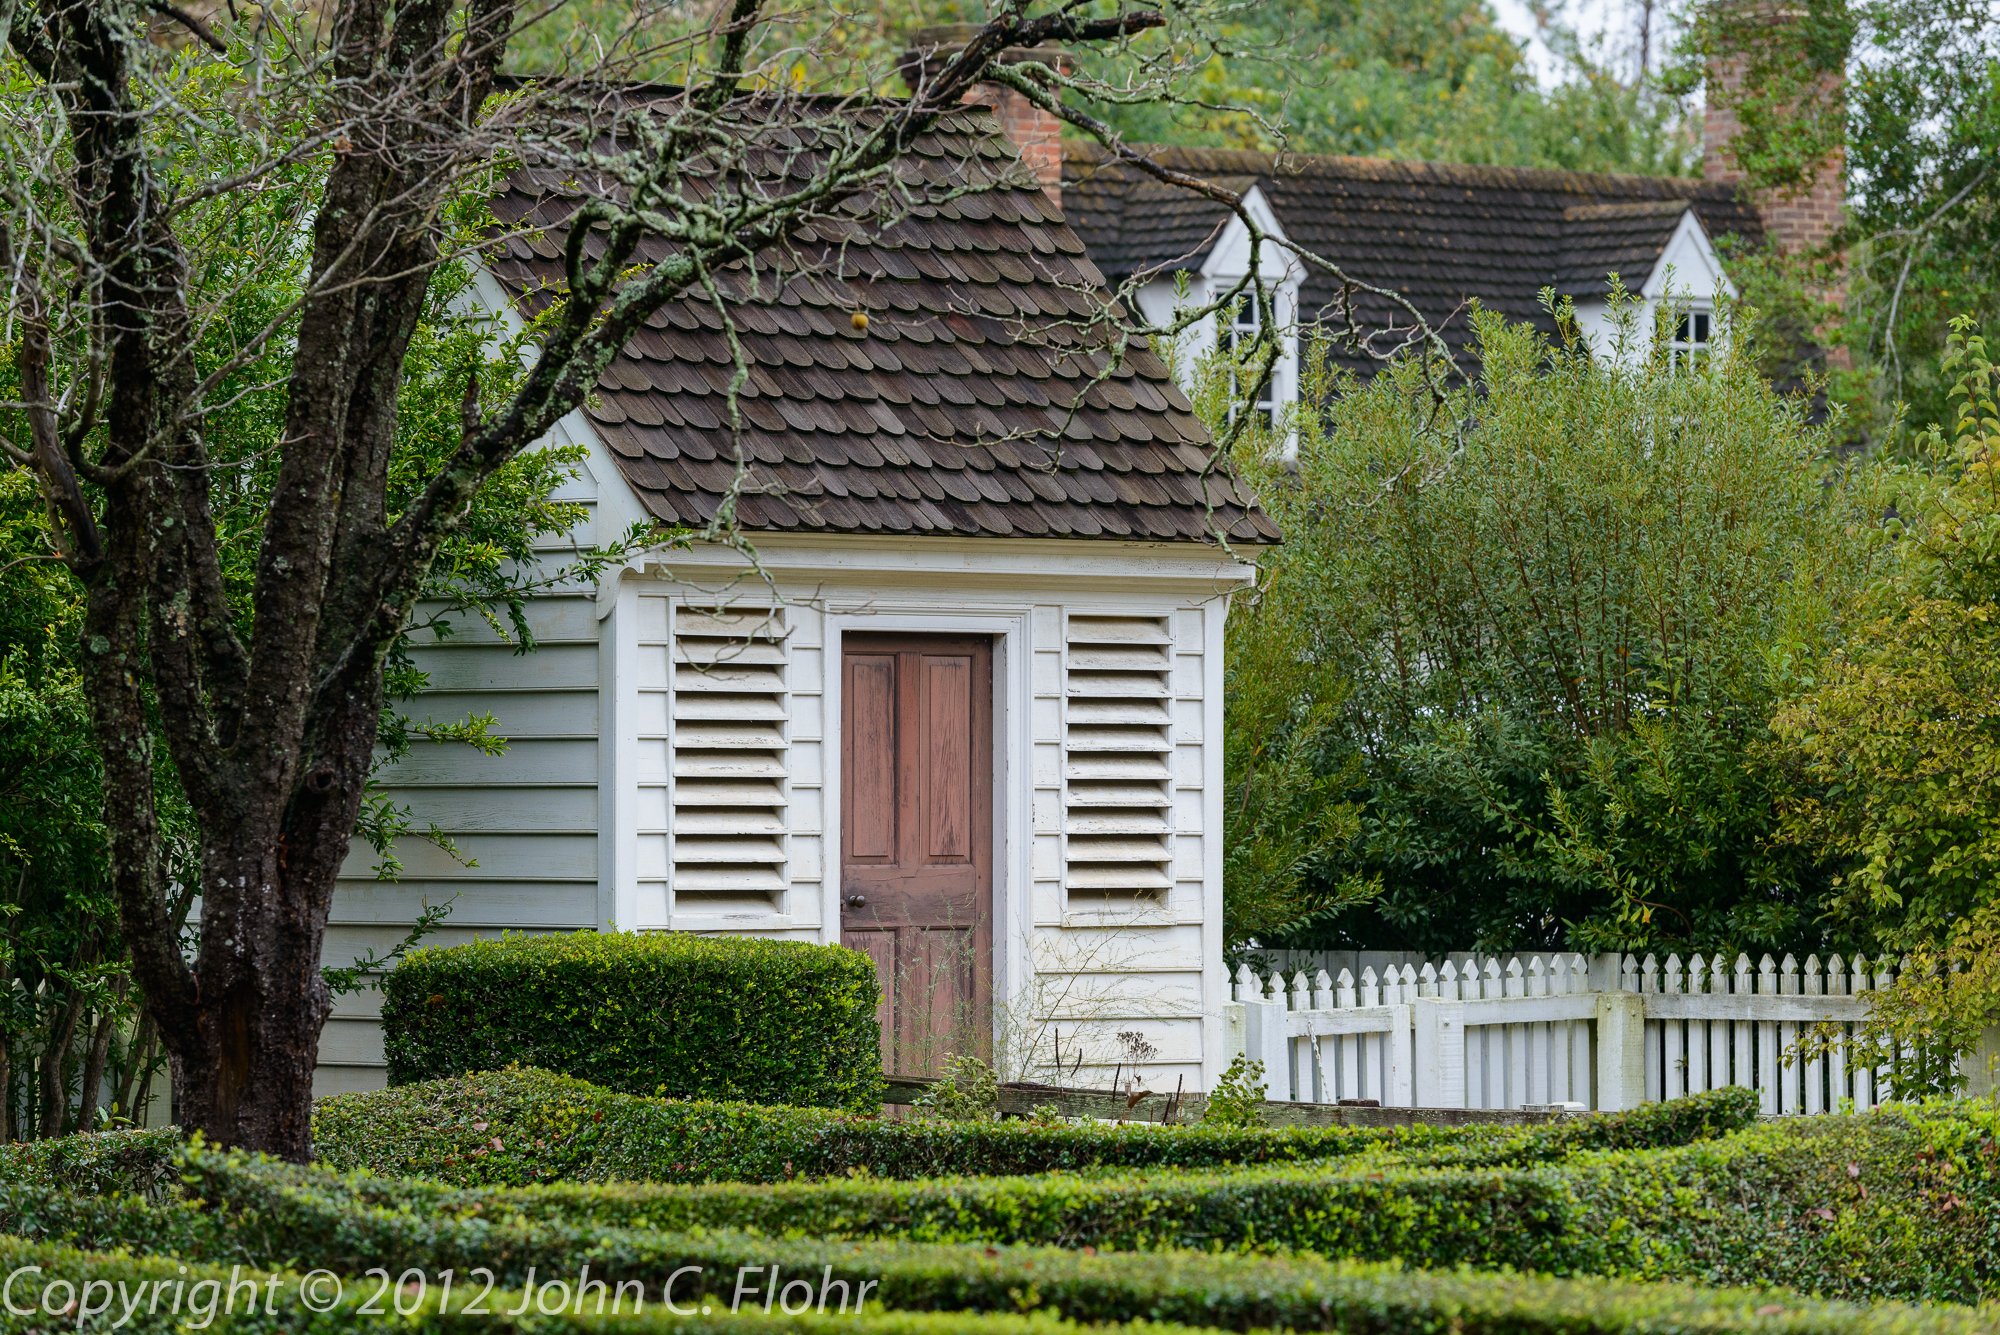 Colonial Williamsburg Archives - isoTraveler.com